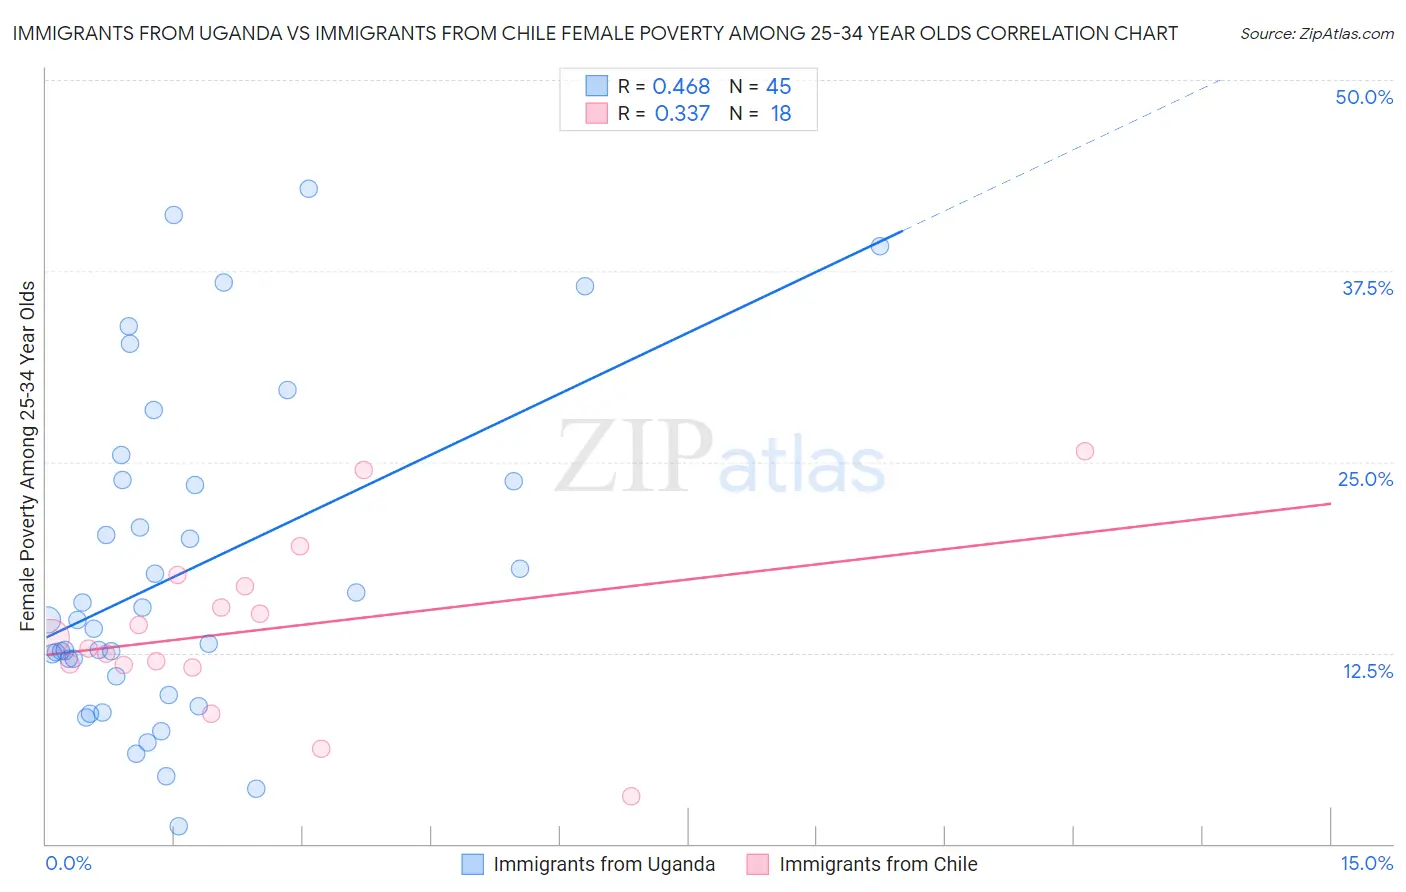 Immigrants from Uganda vs Immigrants from Chile Female Poverty Among 25-34 Year Olds